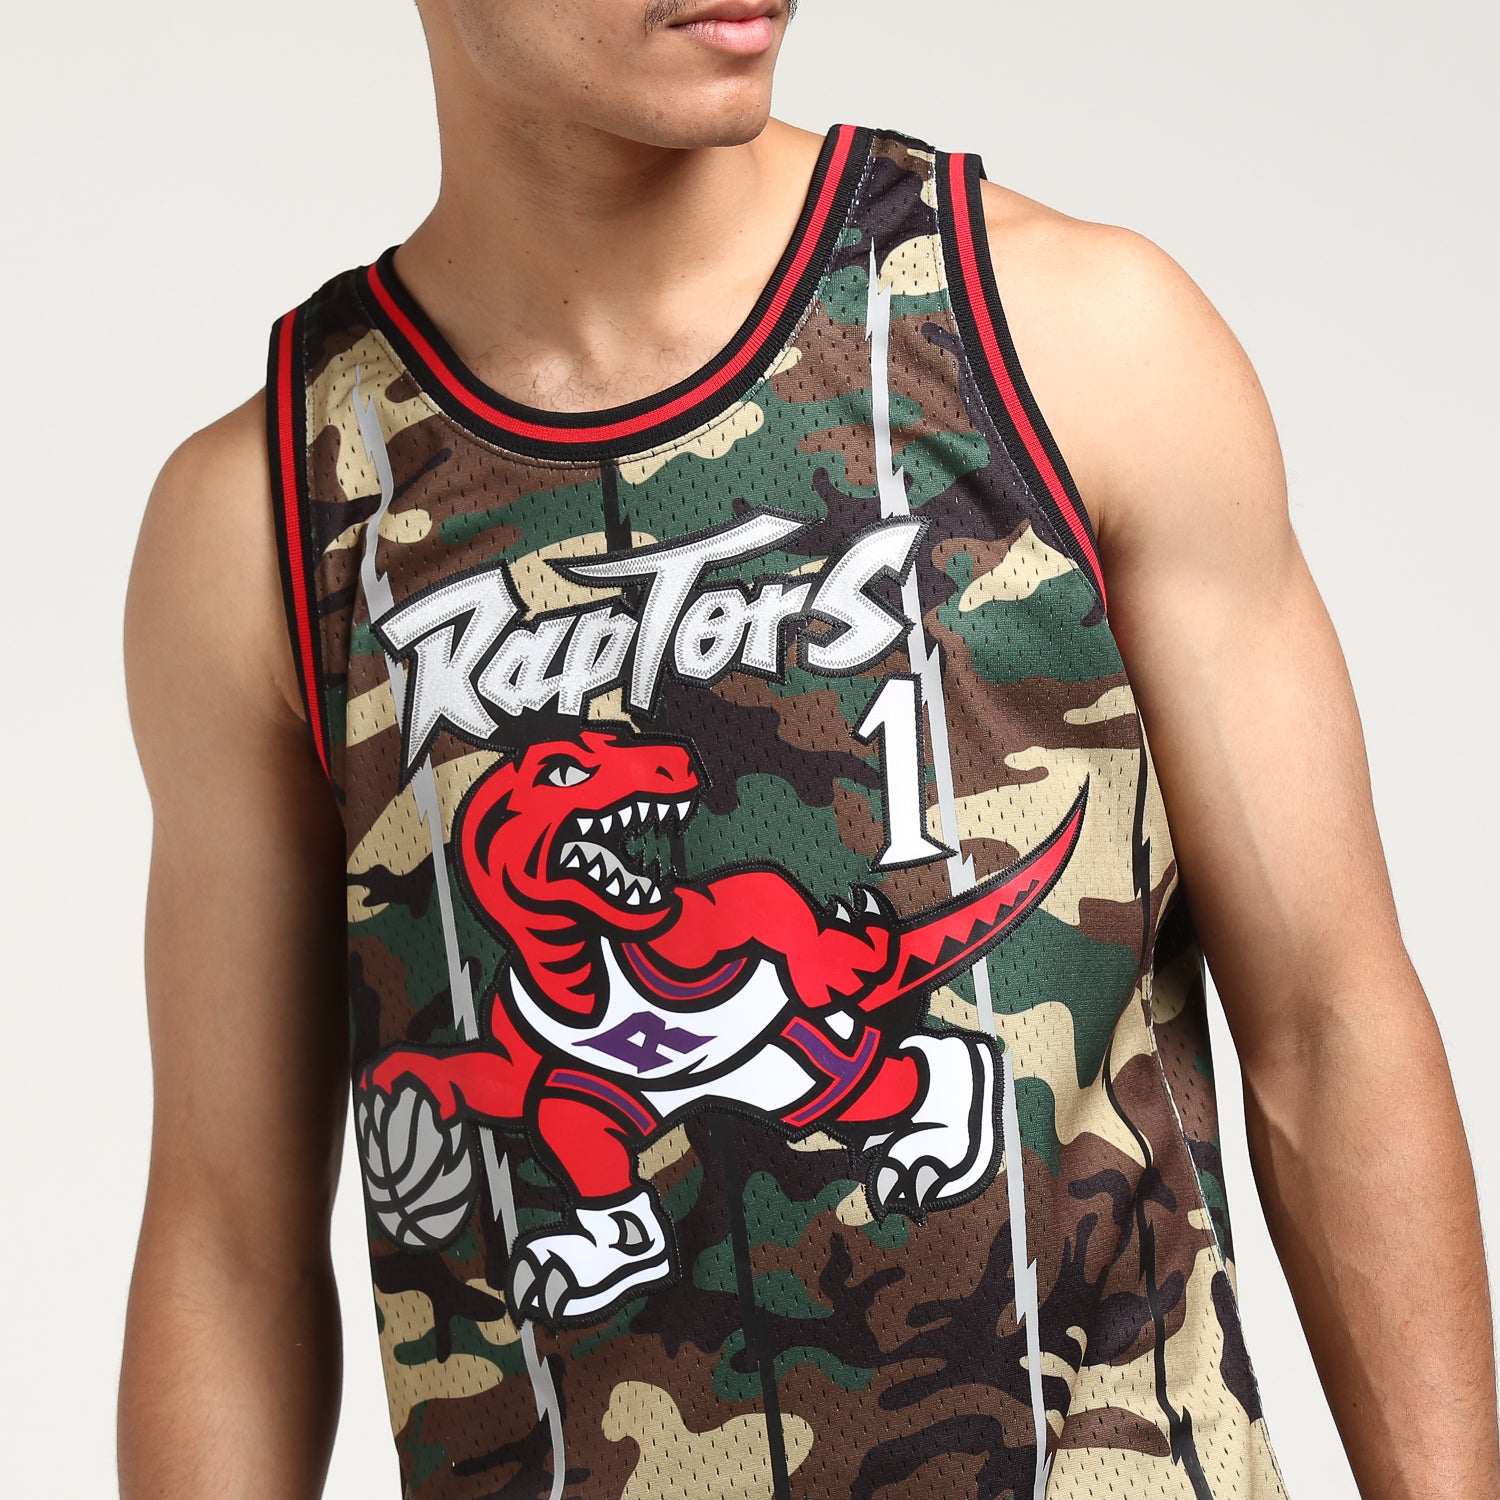 raptors camouflage jersey for sale